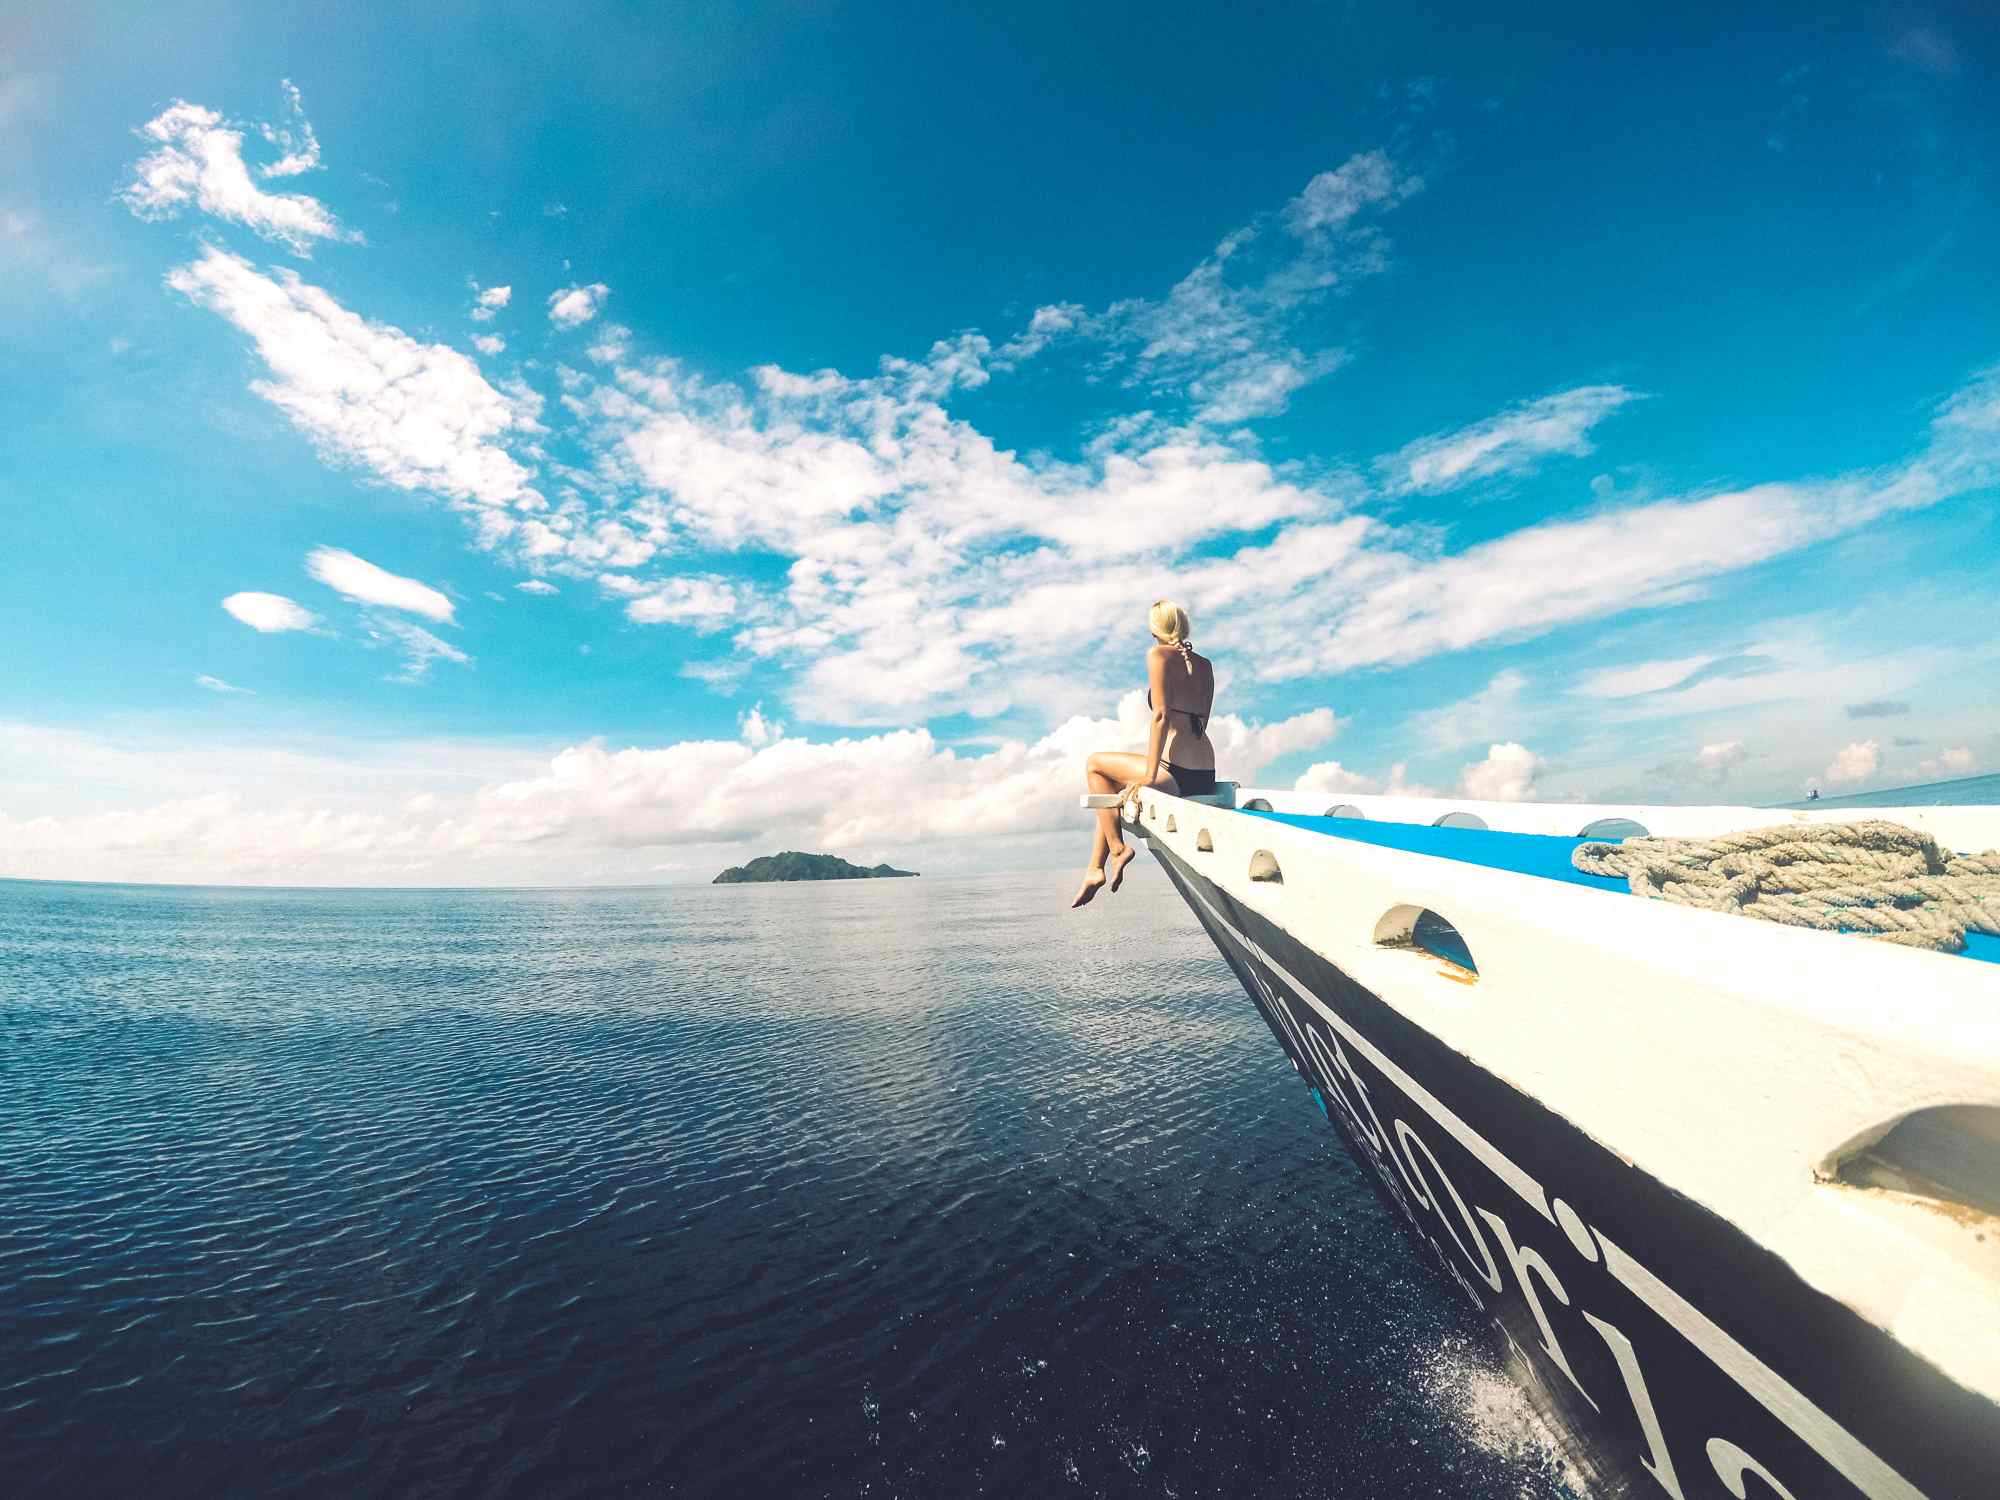 A picture from one of our 5 most popular excursions near Dumaguete. A boat sailing towards Apo Island in the Philippines and a person sitting in the front